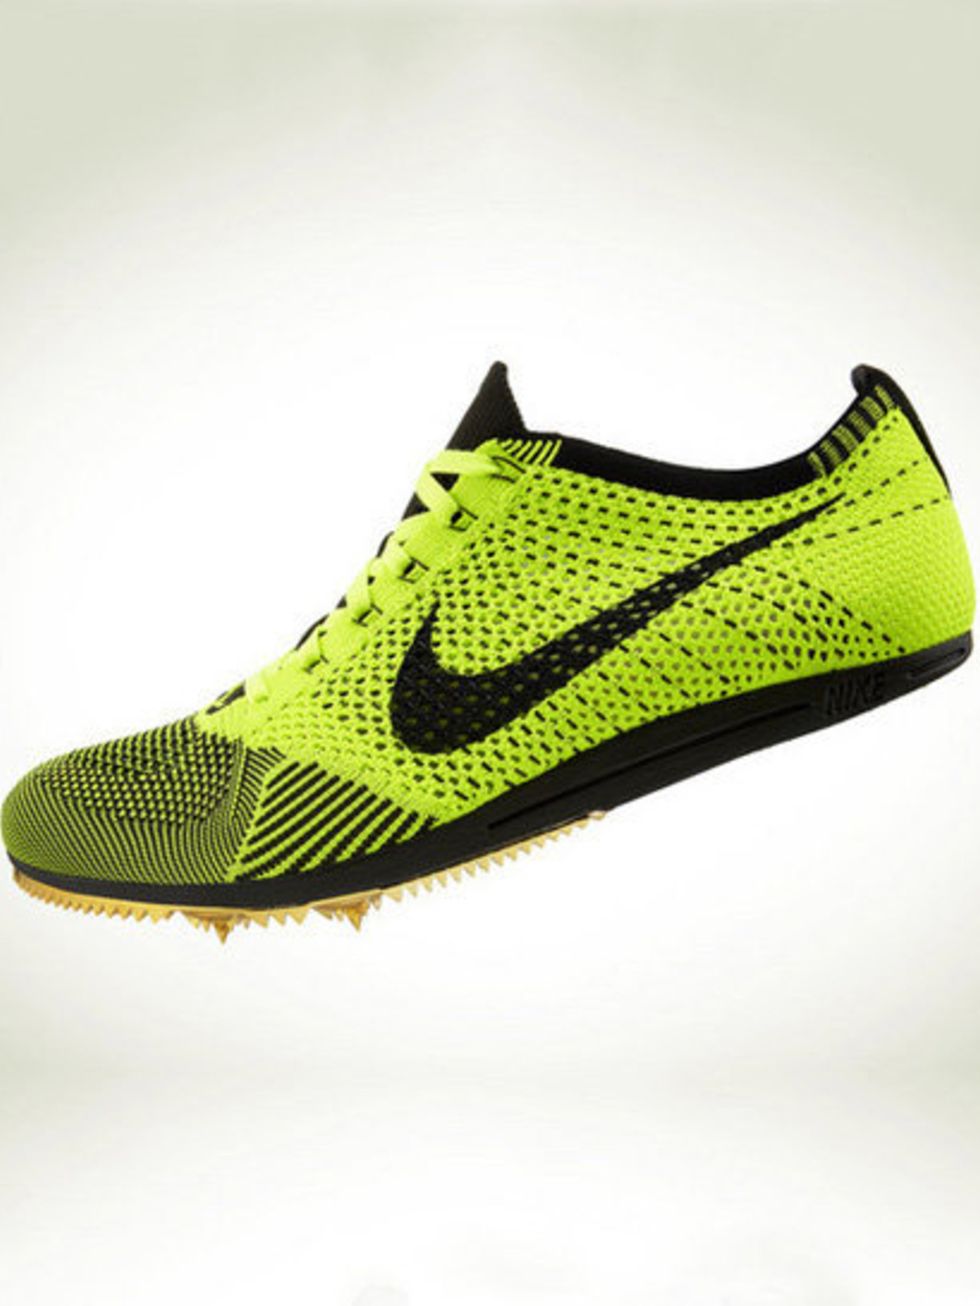 <p>Nike Flyknit Racer from the 'Volt Collection'</p>